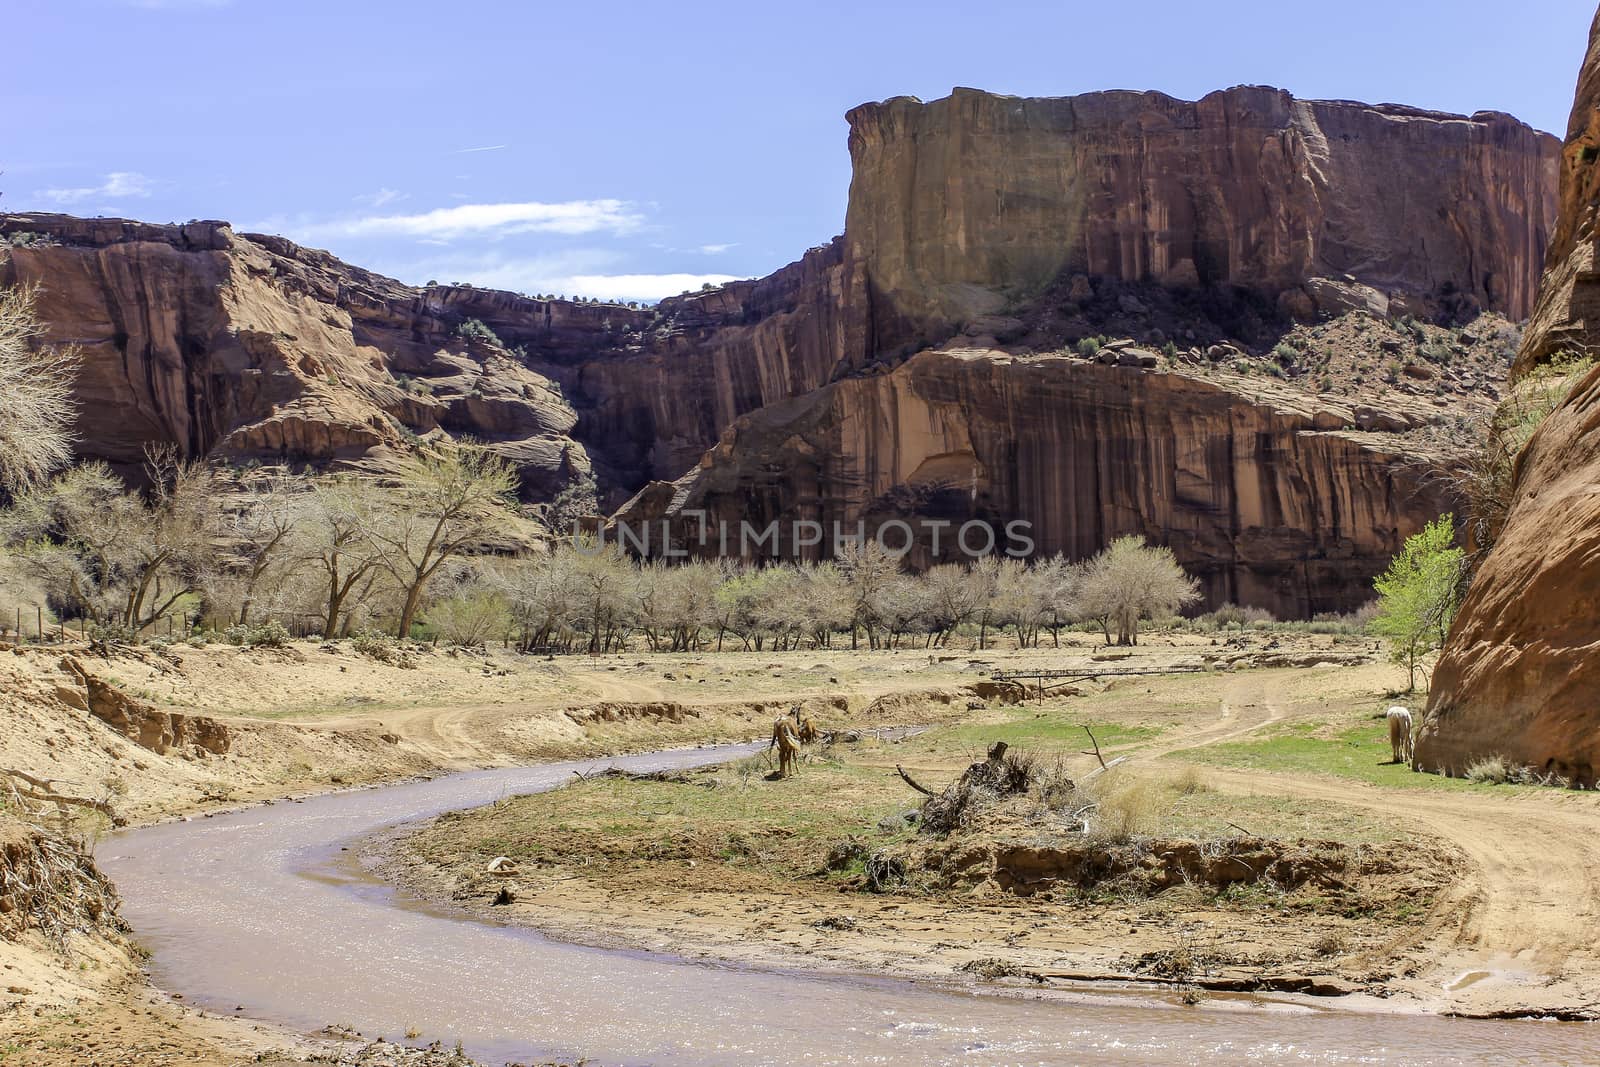 A view of a canyon river with a cowboy tending to his horses and steep red sandstone cliffs in the distance